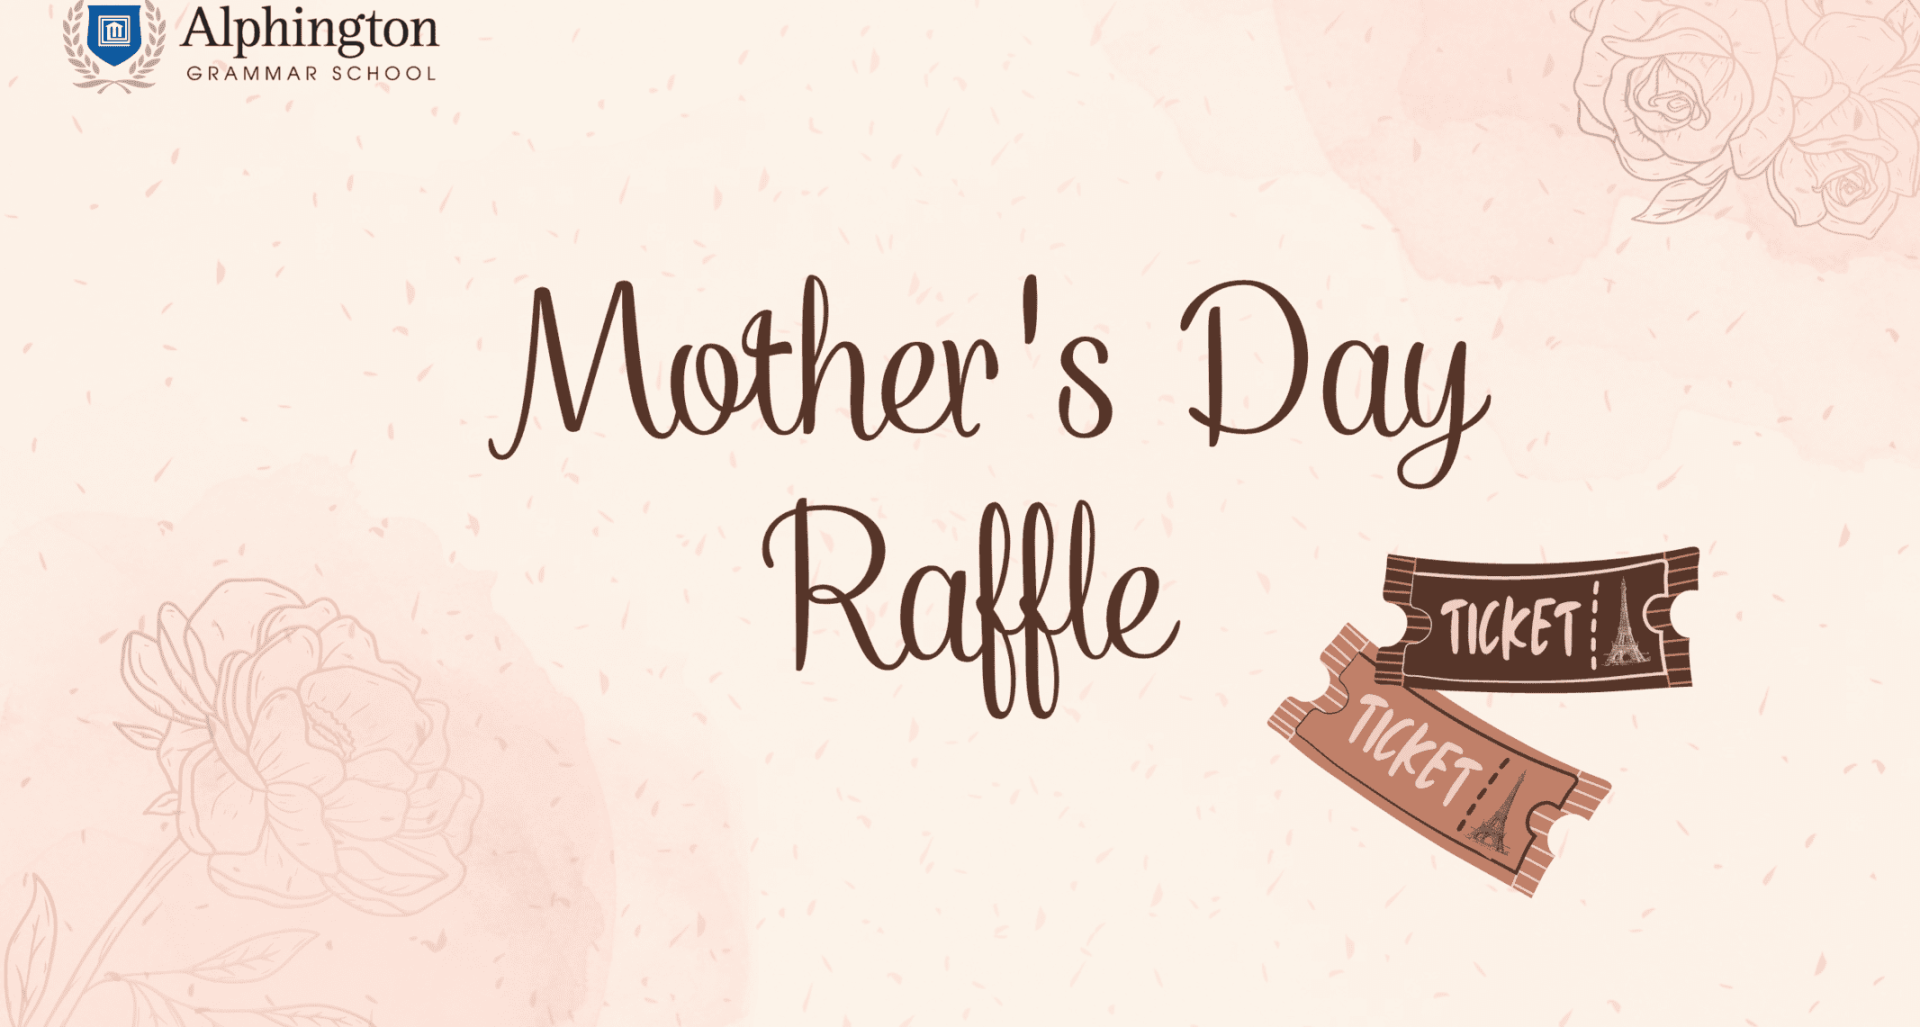 Mother's Day Raffle (2500 × 1500 px)